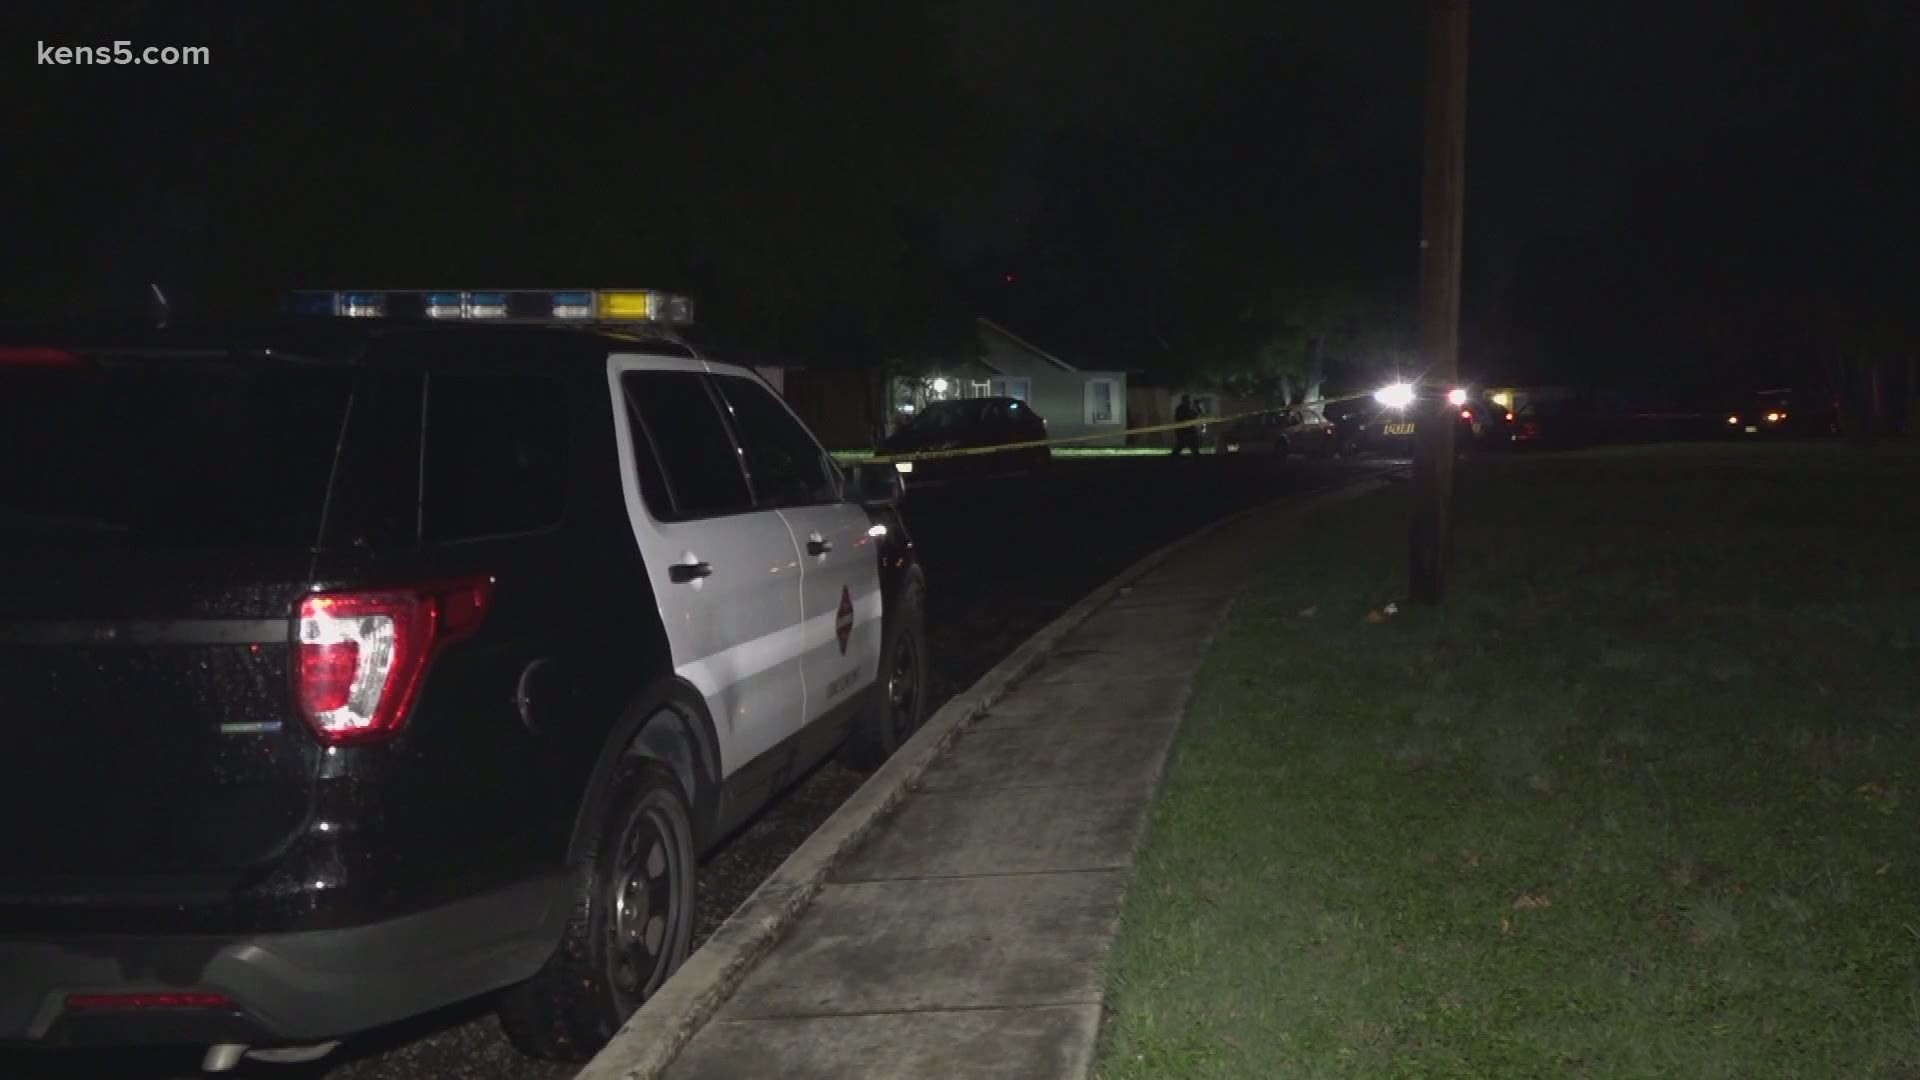 San Antonio Police are investigating a stabbing on the city's southeast side after a man was found with stab wounds Friday night.